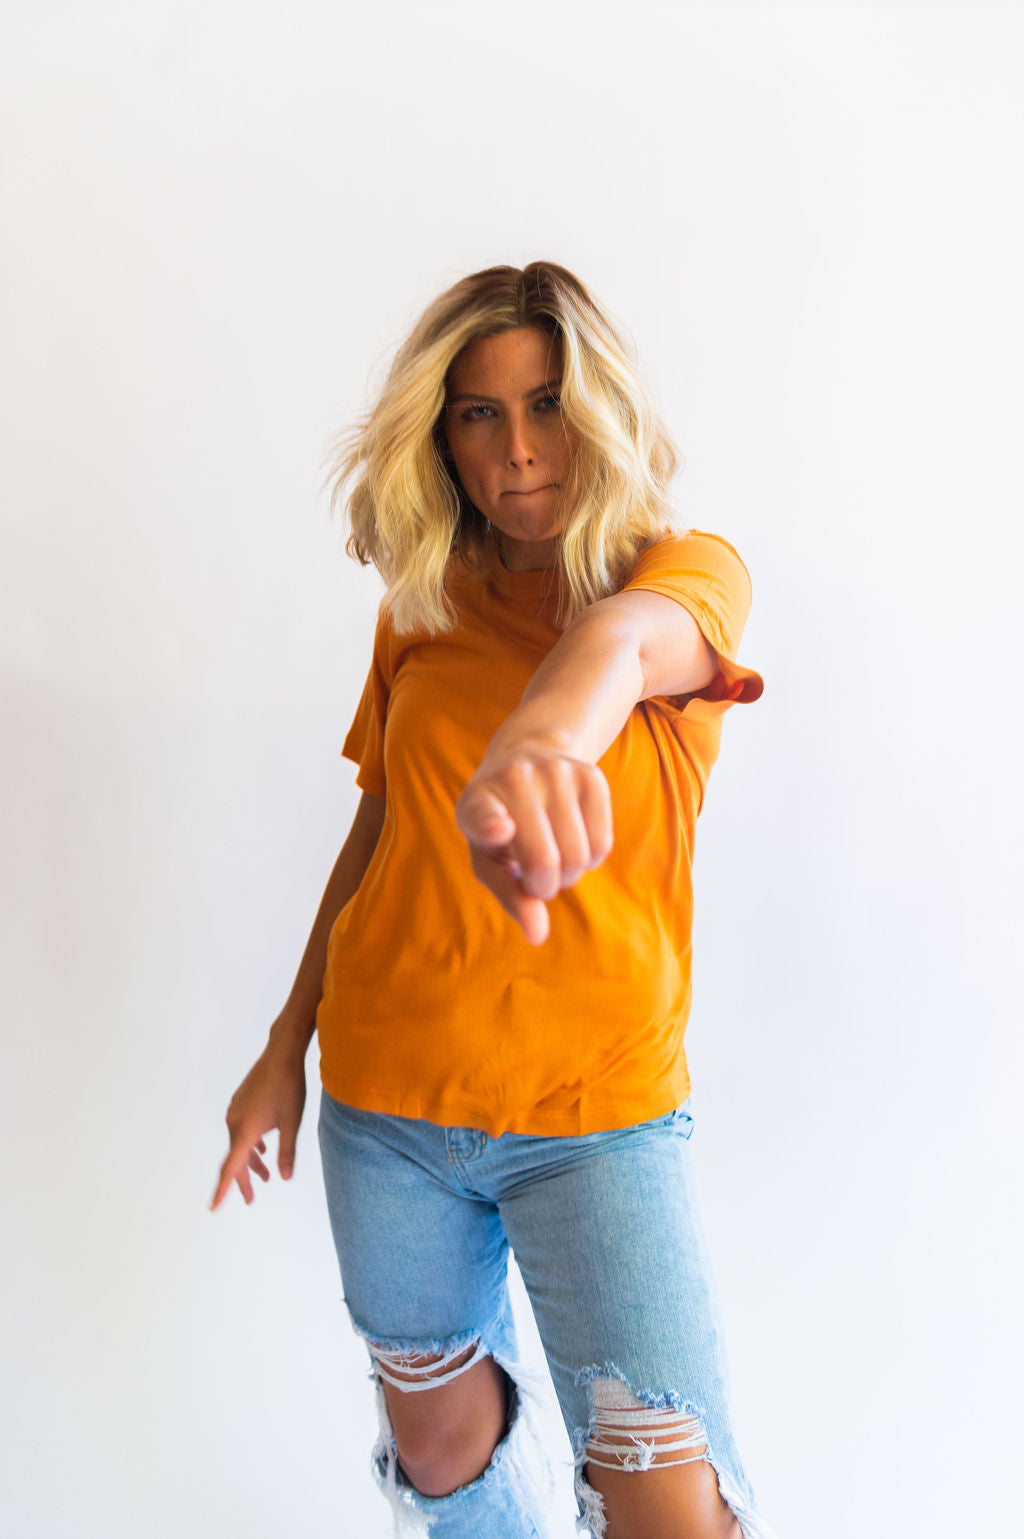 the “fancier” version of a t-shirt. the design: blank for all of our ladies who love a good basic tee! color: apricot buff tee. the material:100% viscose with a boxy, slouchy fit. the sleeves are wide with a ringer style neckline. HIGH CHANCE OF SHRINKAGE! Wash on cold and then hang dry! It will shrink in length in the dryer. Ramble & Co. is a family lifestyle brand creating simple, timeless, quality apparel. Each piece is handprinted in our brick and mortar studio located in Wichita Falls, Texas.  